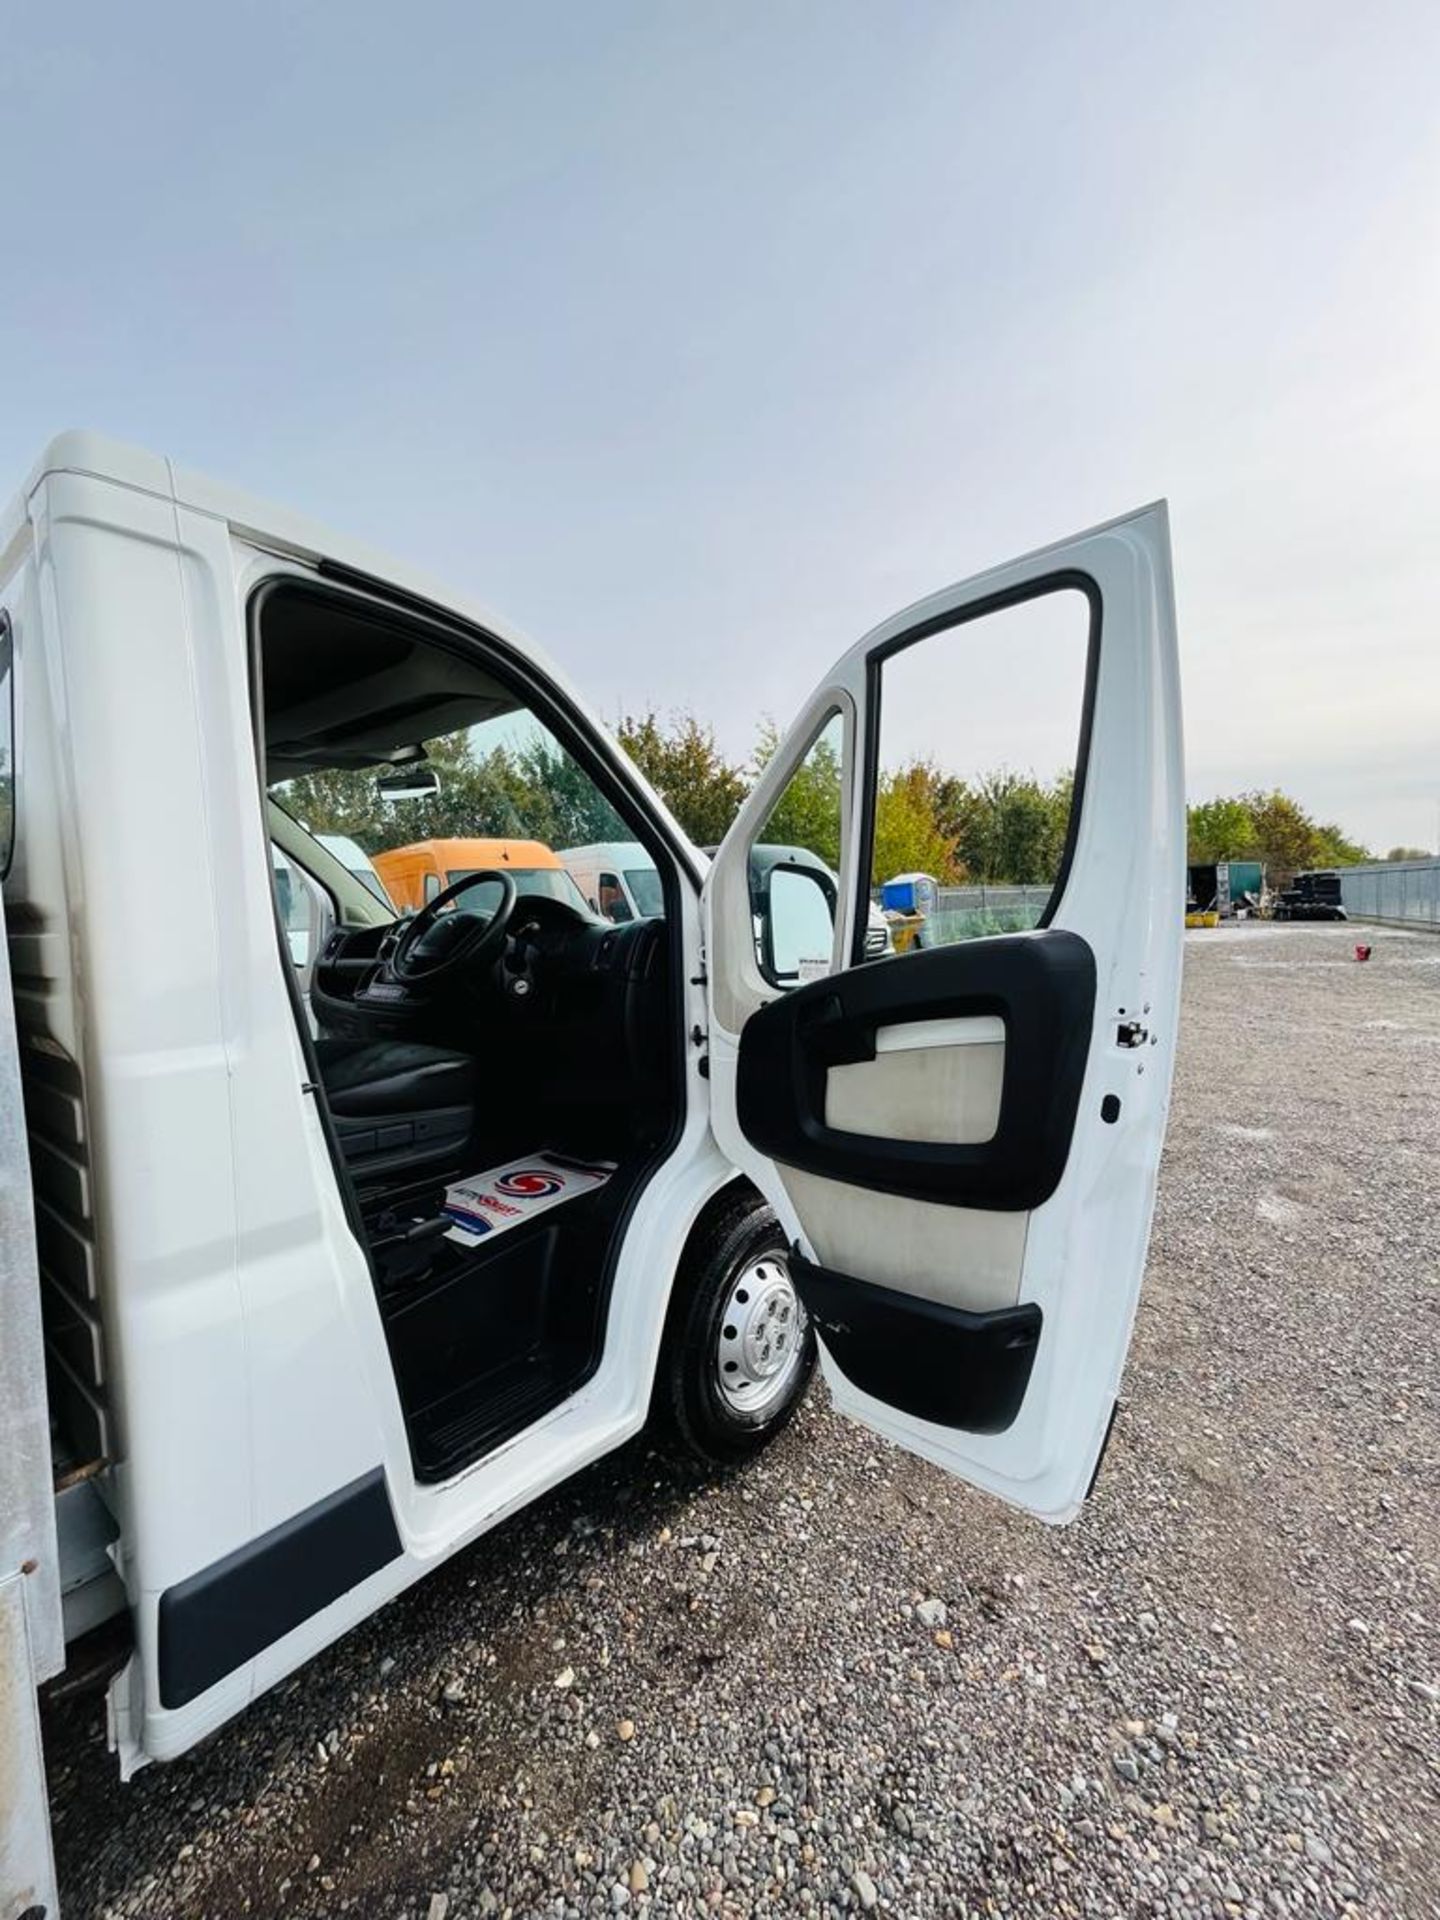 ** ON SALE ** CITROEN RELAY 35 2.2 HDI 130 L3 2015 (15 Reg) - Alloy Dropside - Bluetooth Pack - Image 12 of 24